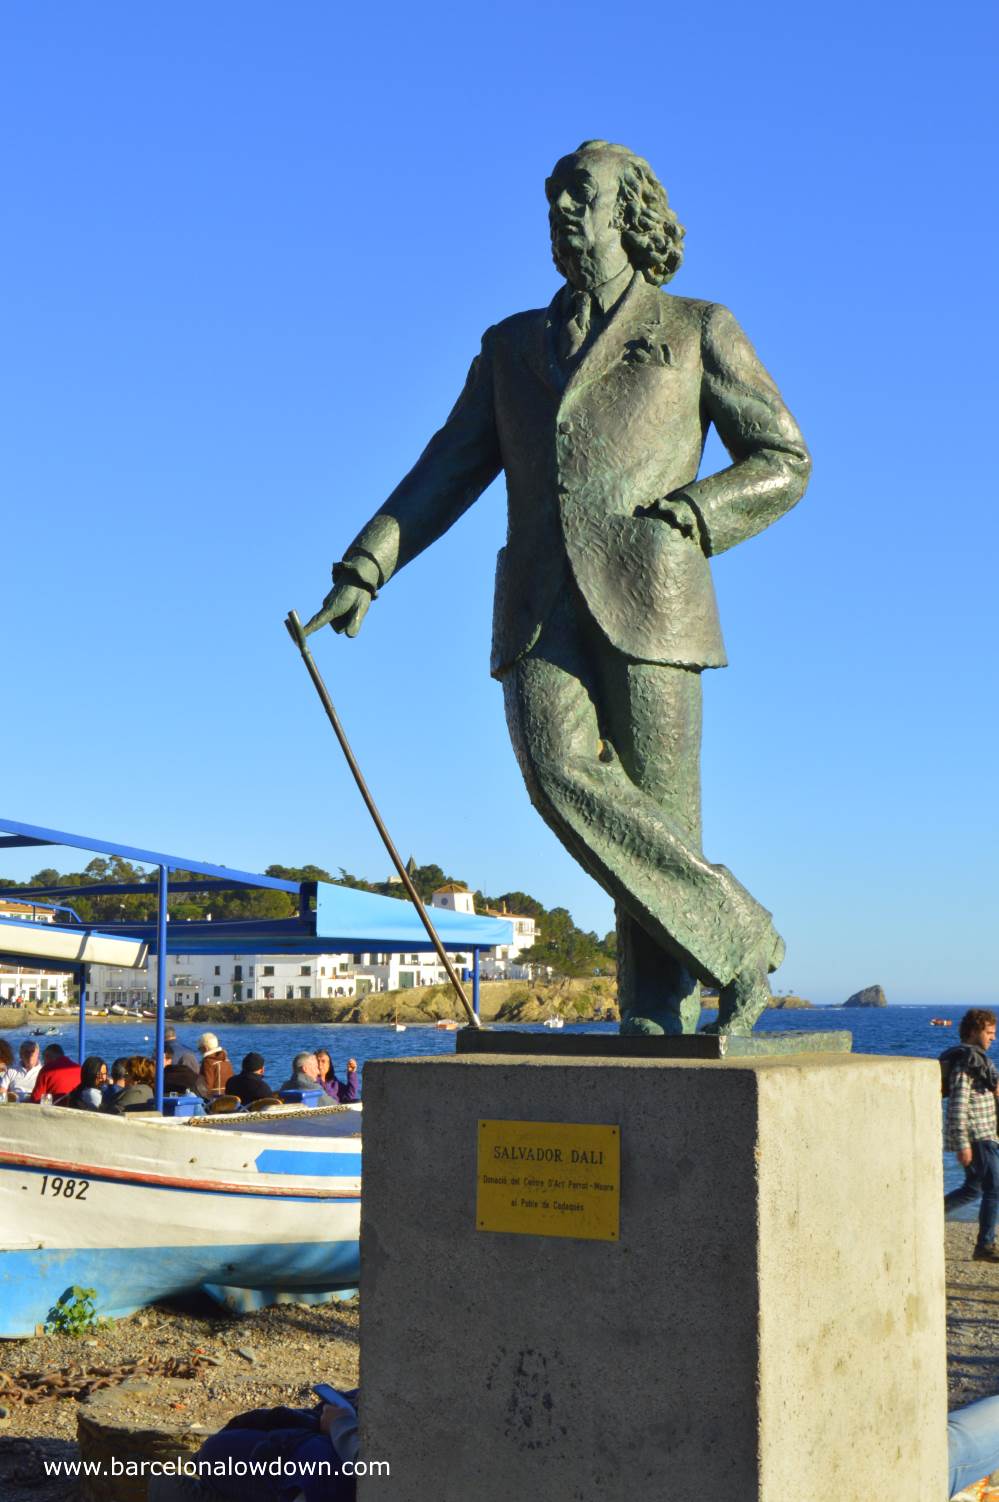 Bronze statue of surrealist artist Salvador Dalí near his home in Cadaques, part of the Dalinian triangle route